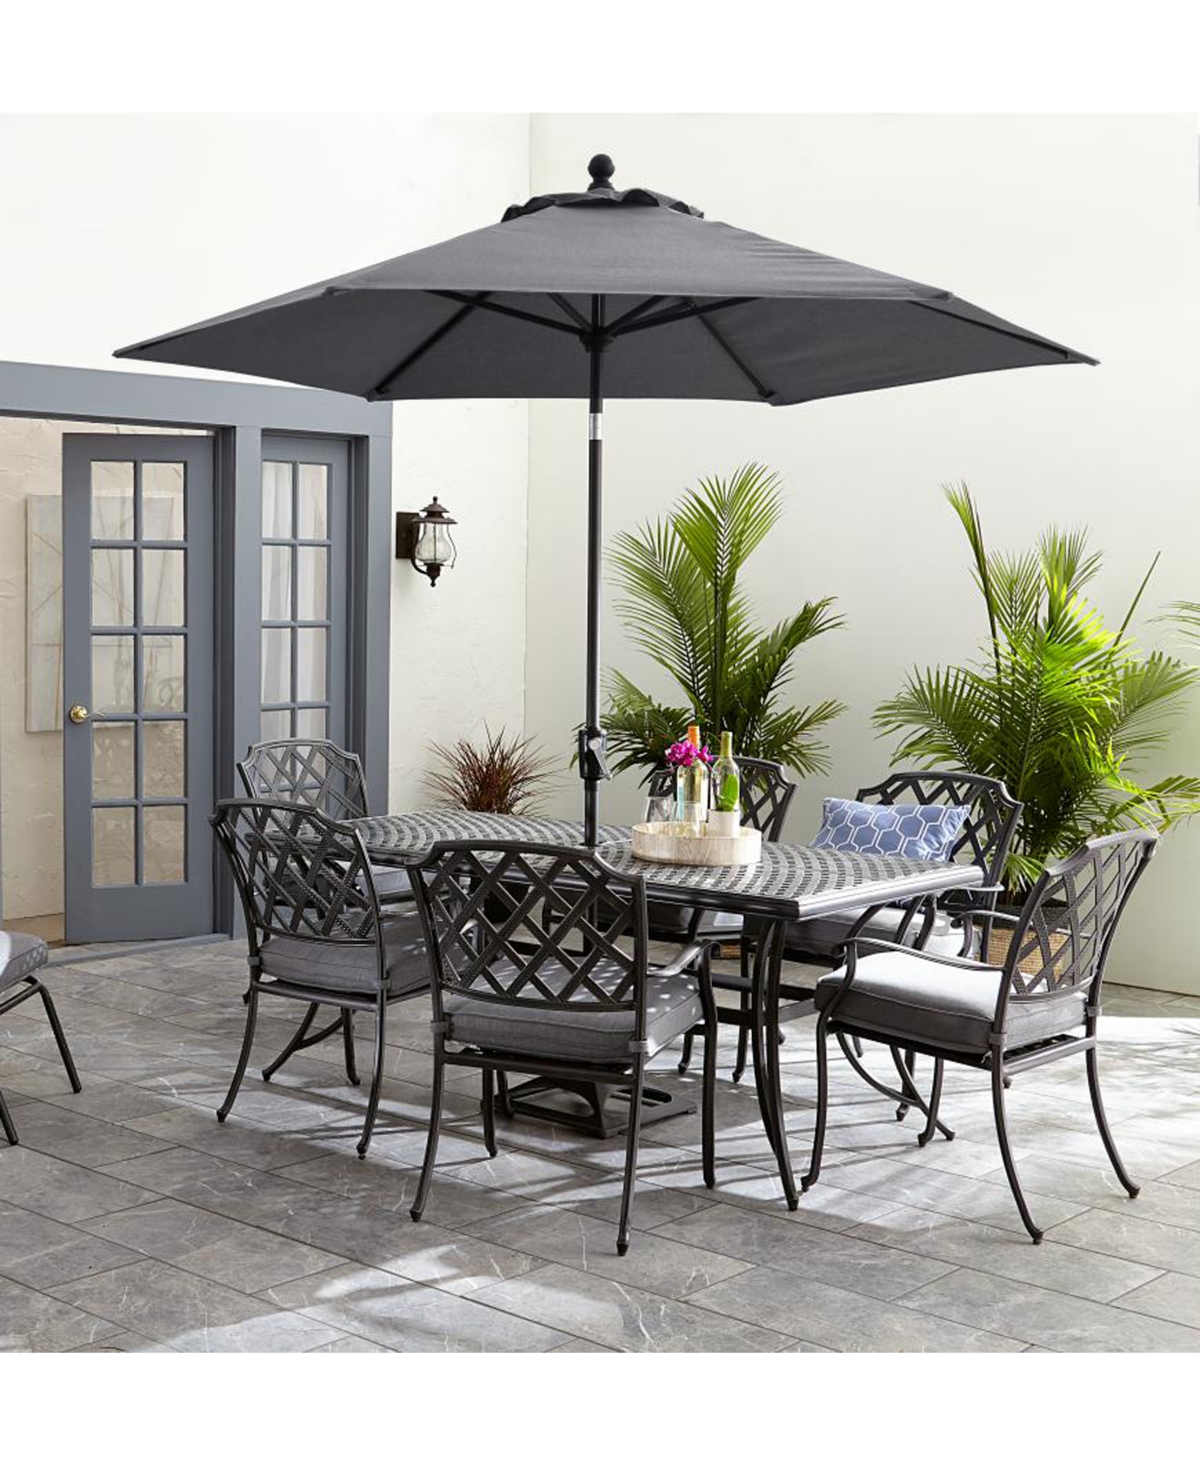 Vintage Ii Outdoor Cast Aluminum 7-Pc. Dining Set (72 X 38 Table & 6 Dining Chairs) With Sunbrella Cushions, Created for Macys